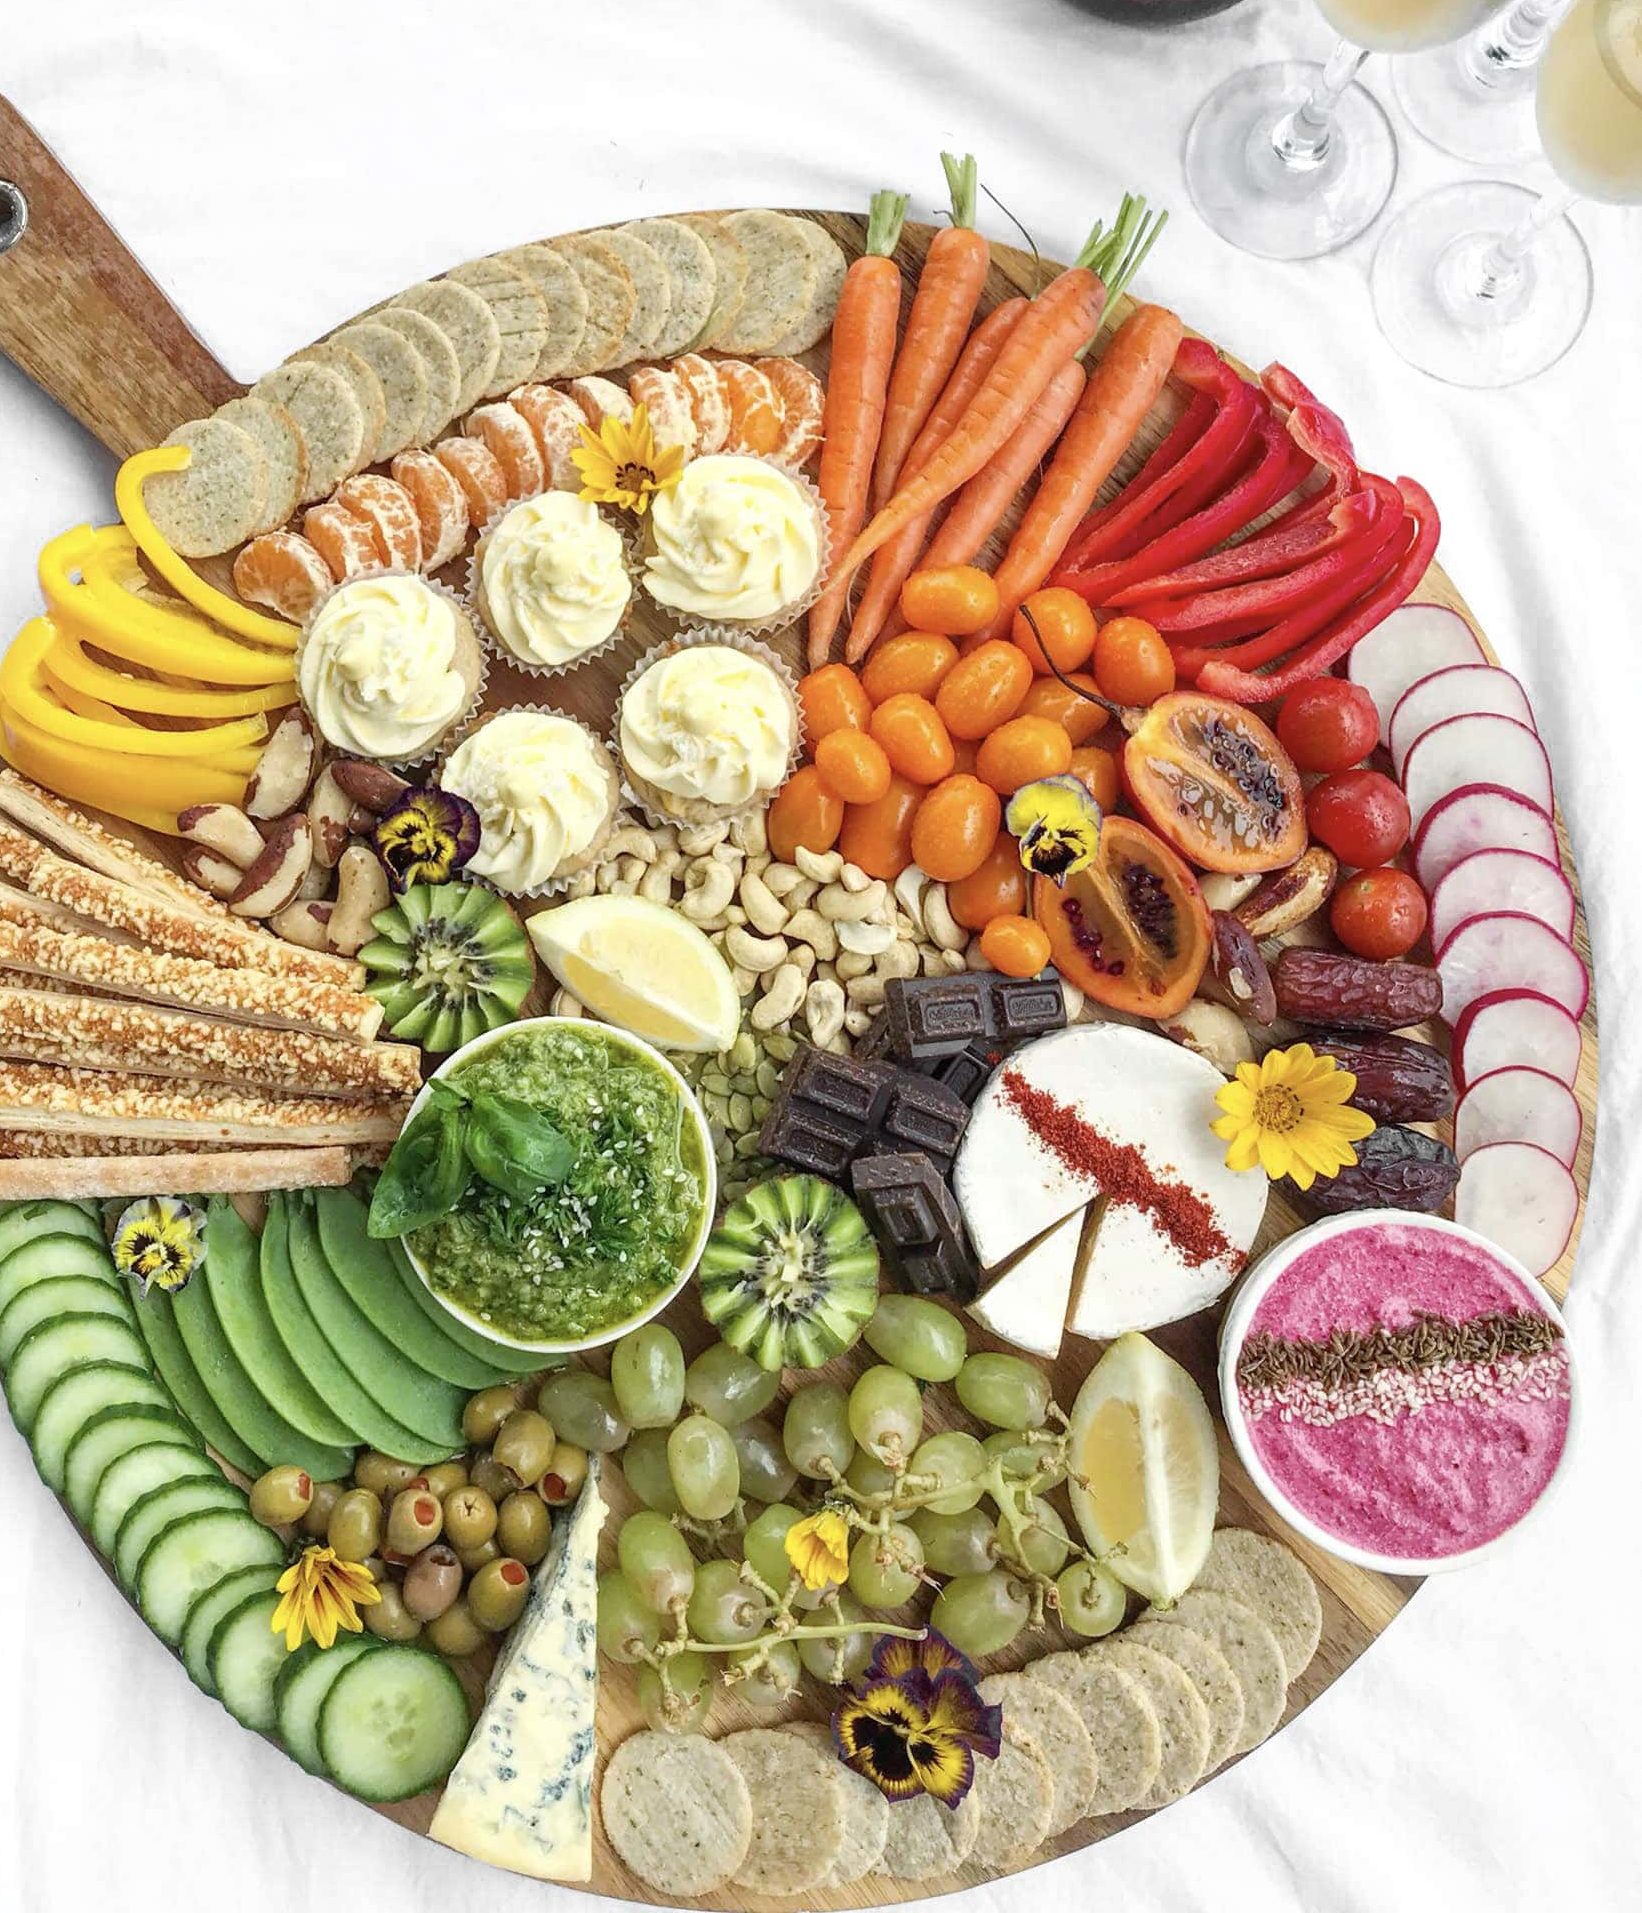 How to Make a Vegetarian Cheese Board - Hey Nutrition Lady